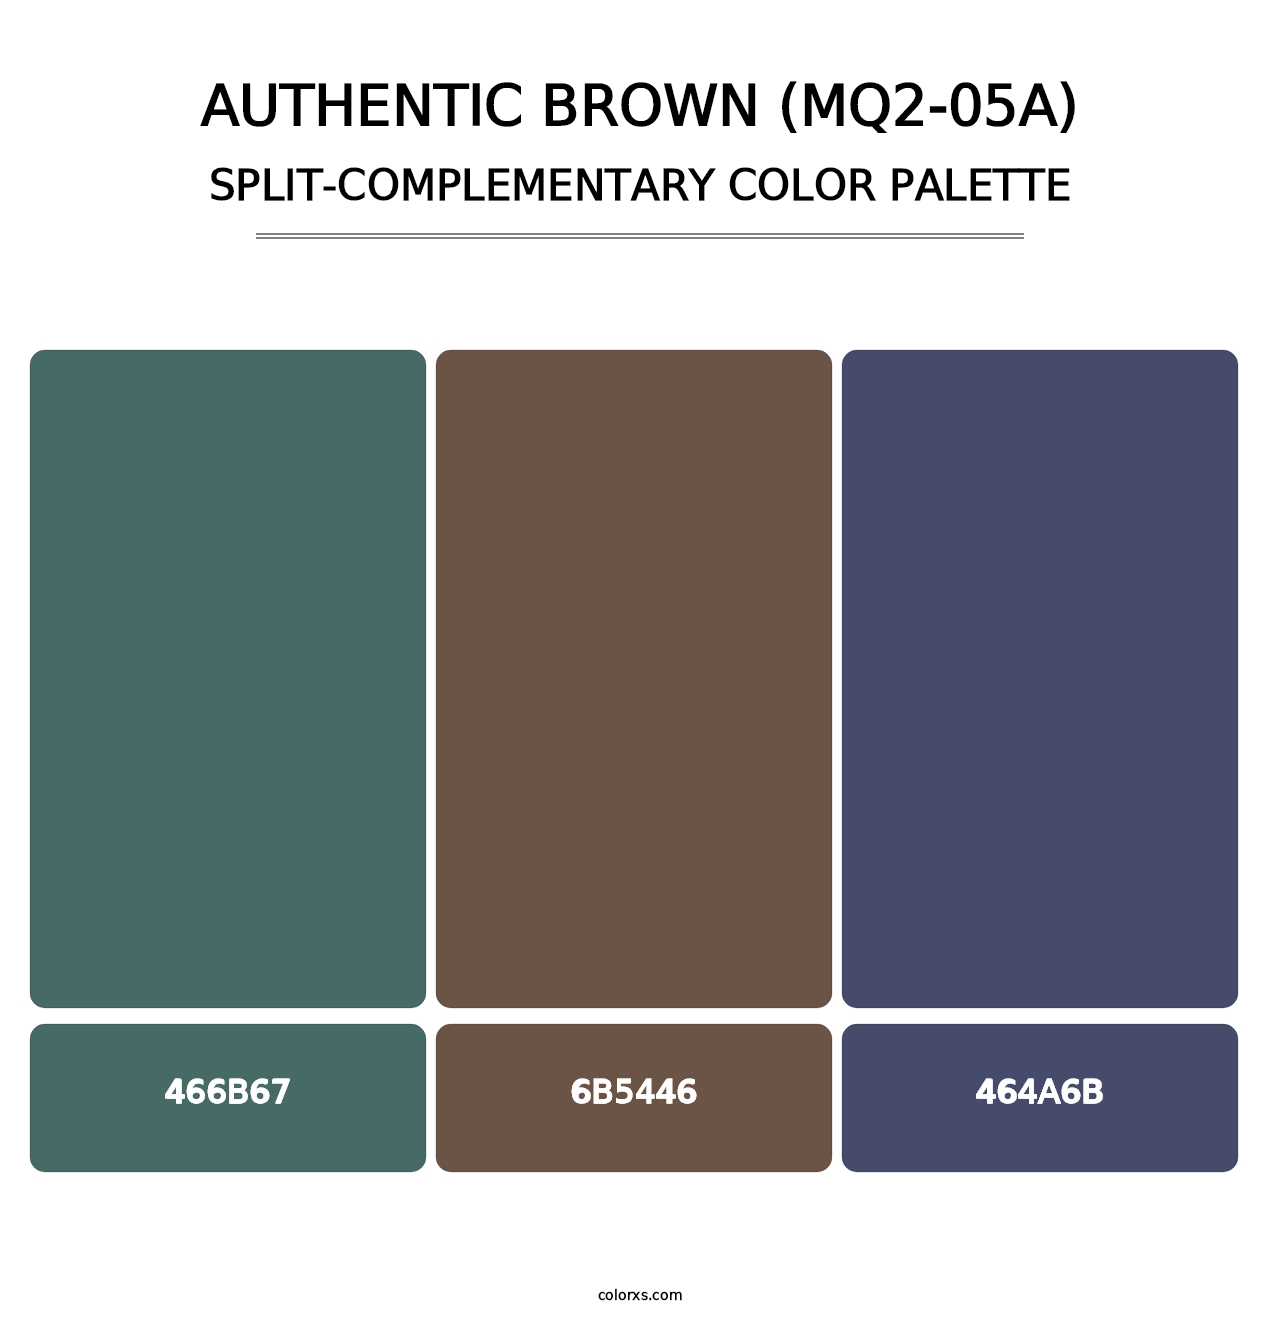 Authentic Brown (MQ2-05A) - Split-Complementary Color Palette